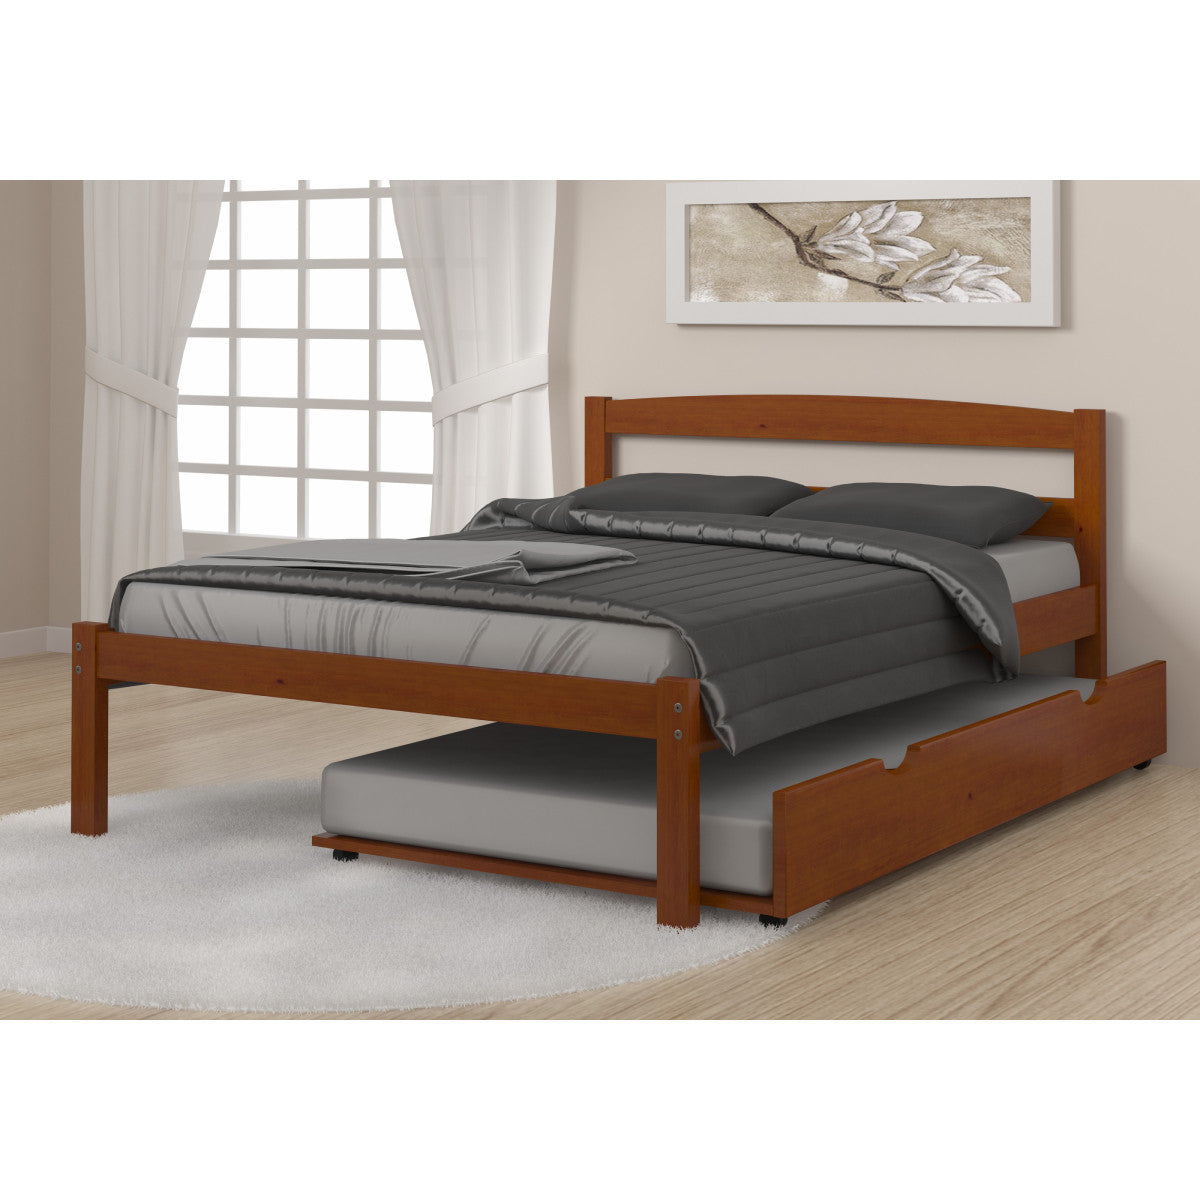 FULL ECONO BED WITH TRUNDLE BED ESPRESSO FINISH